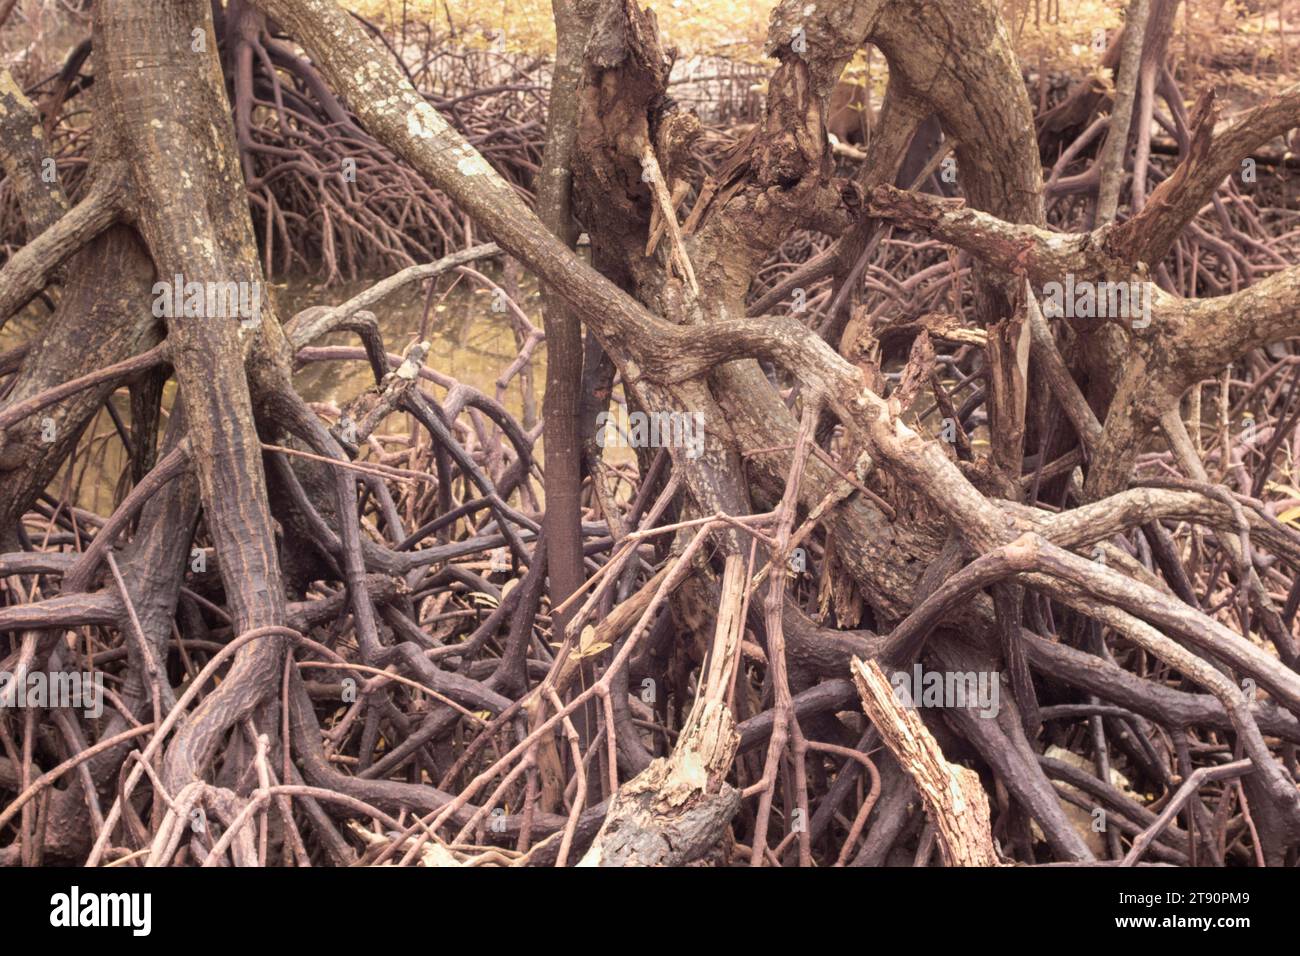 grungy infrared image of the mangrove roots in the muddy seaside. Stock Photo